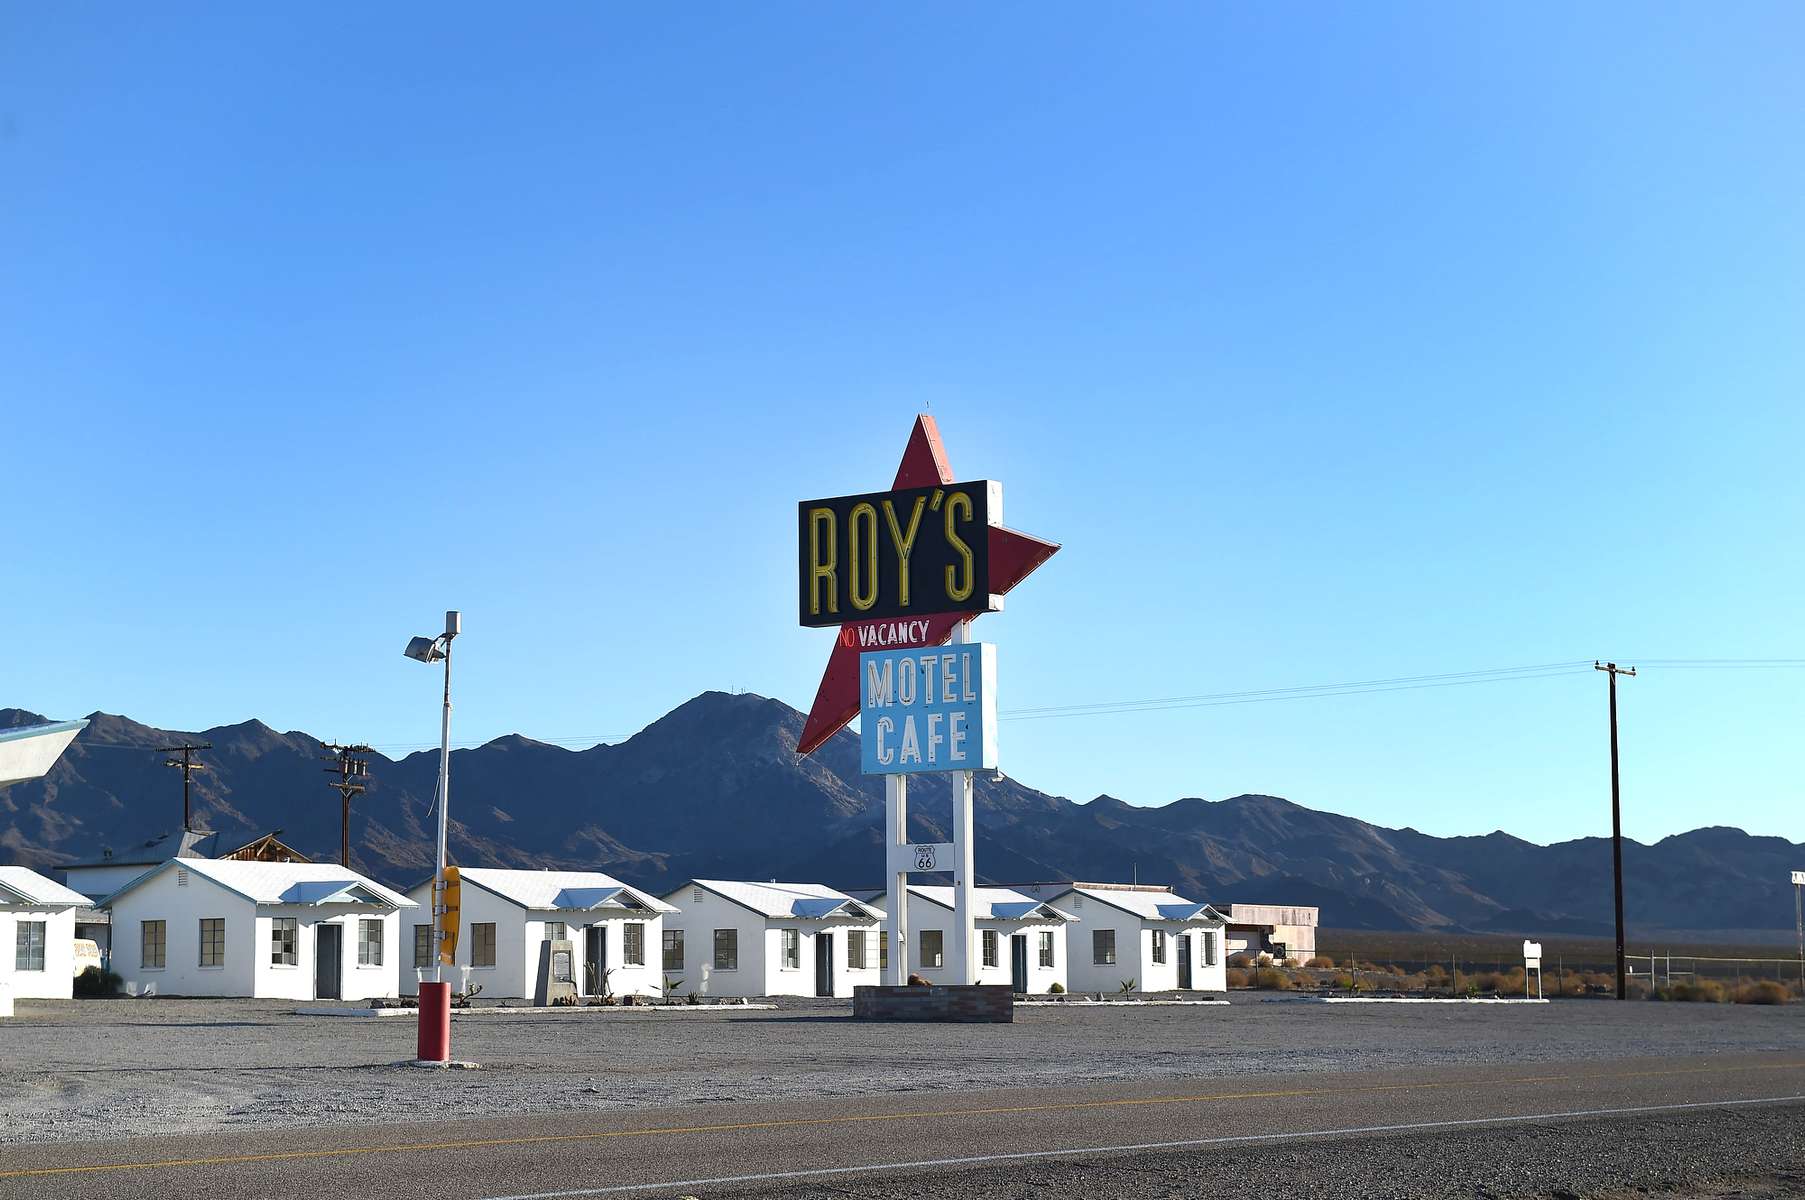 Roy's Motel and Cafe is located on Route 66 in Amboy, CA. It is a tourist attraction and there are plans to restore it. Photo taken on February 19, 2022.